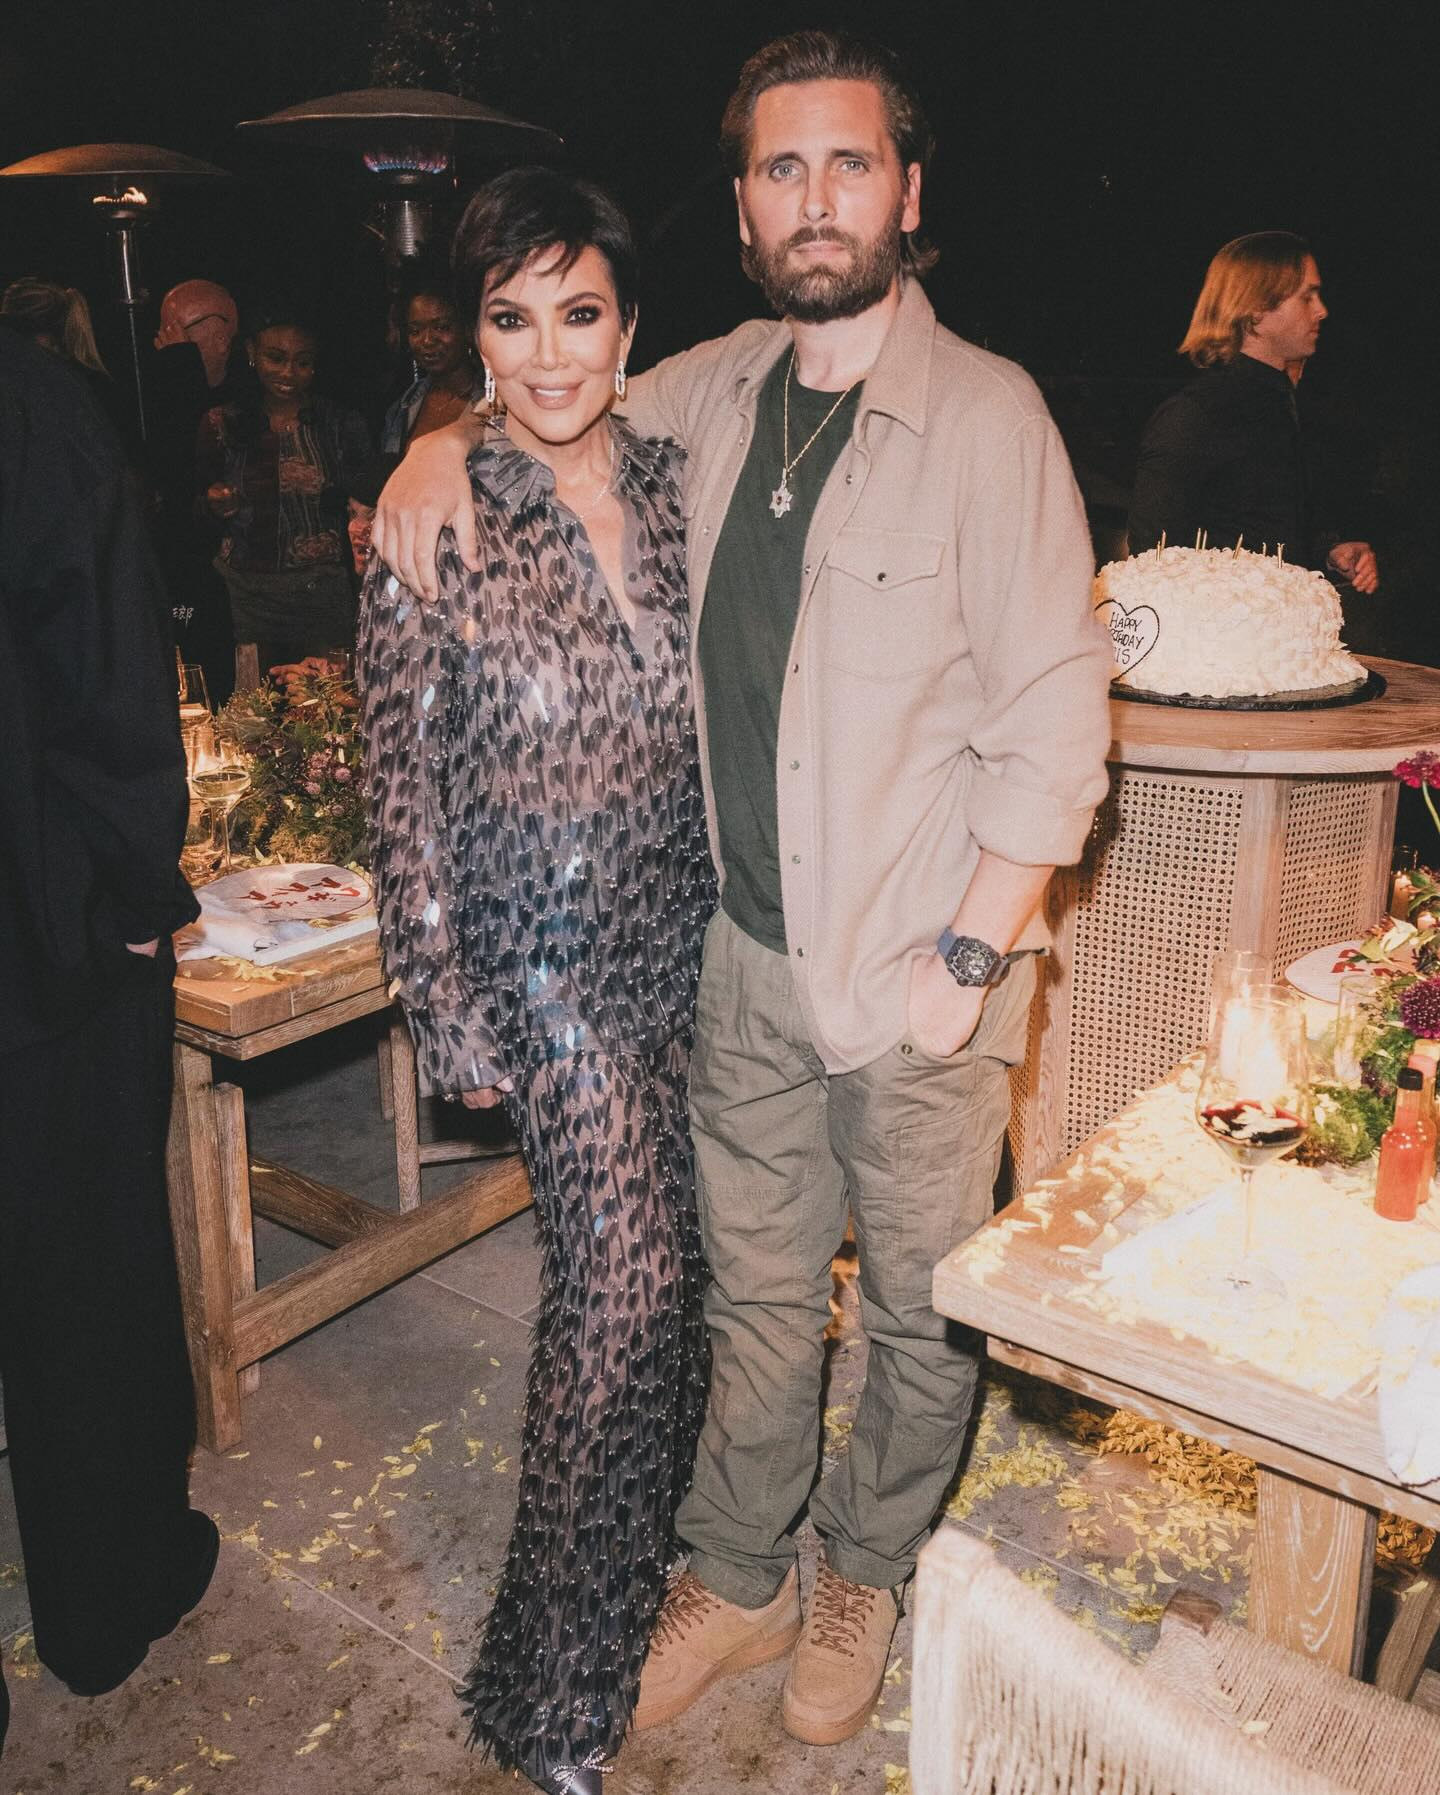 The momager made it clear she and Scott Disick have lost a noticeable amount of weight after showing off their figures in a recent birthday post